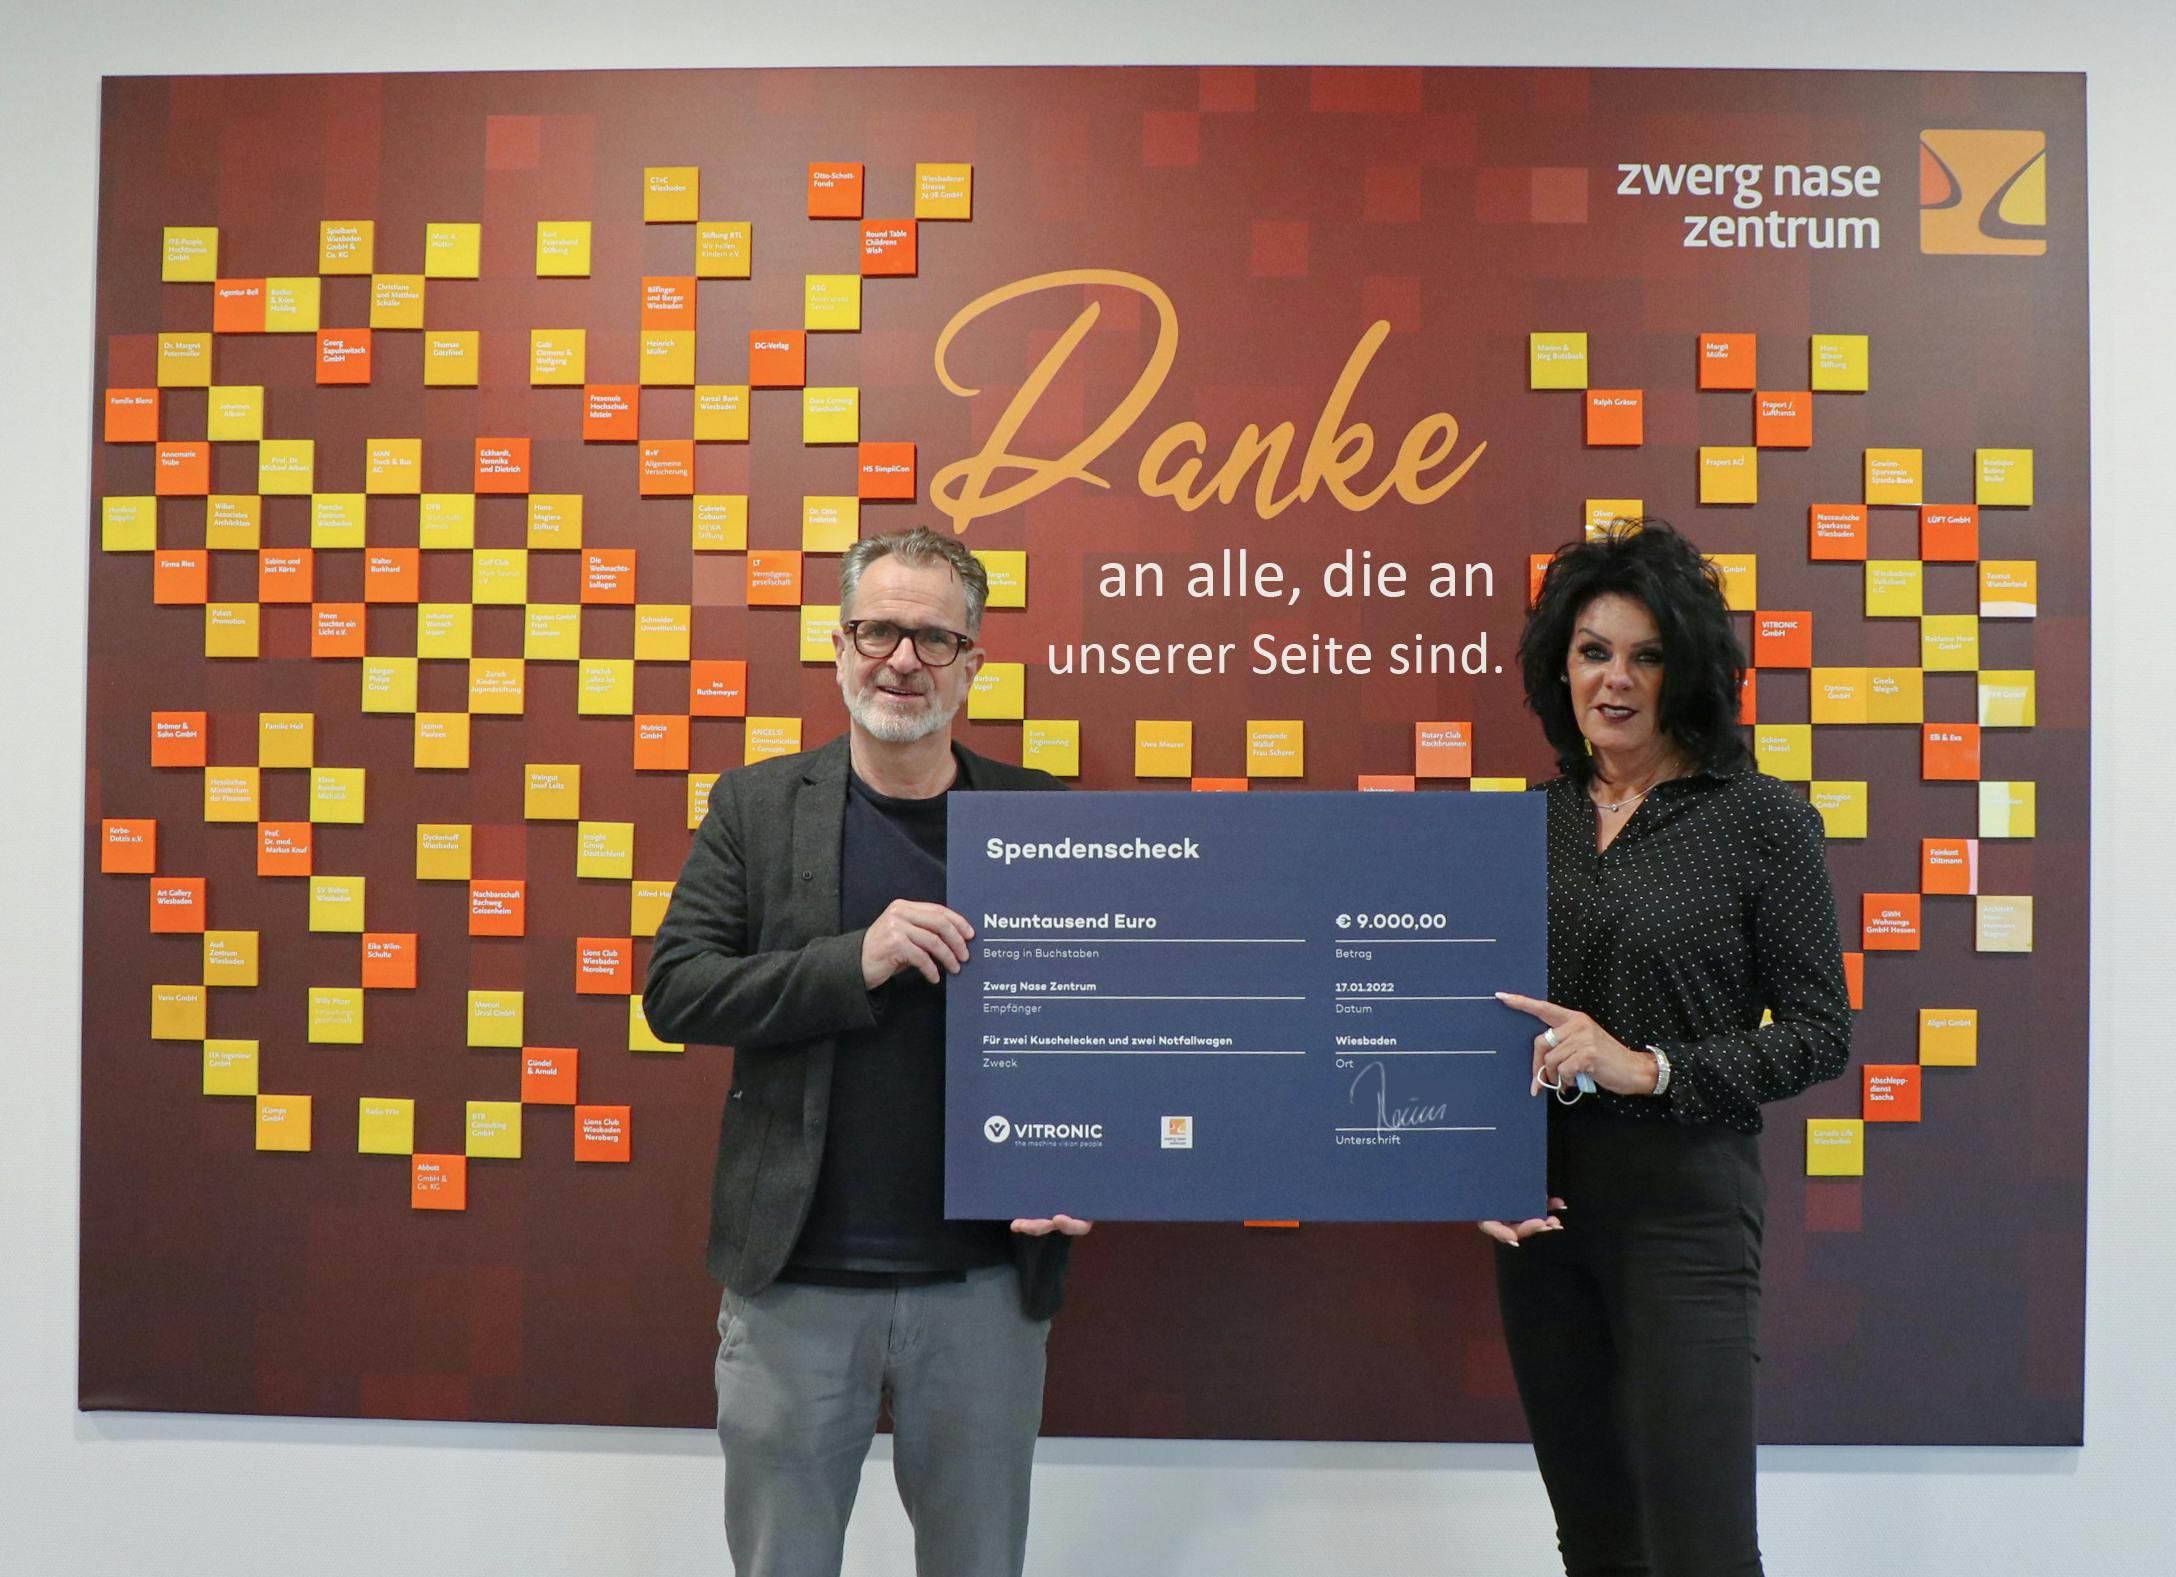 Sabine Scheck from Zwerg Nase and Matthias Pörner, CFO VITRONIC, at the presentation of the donation.